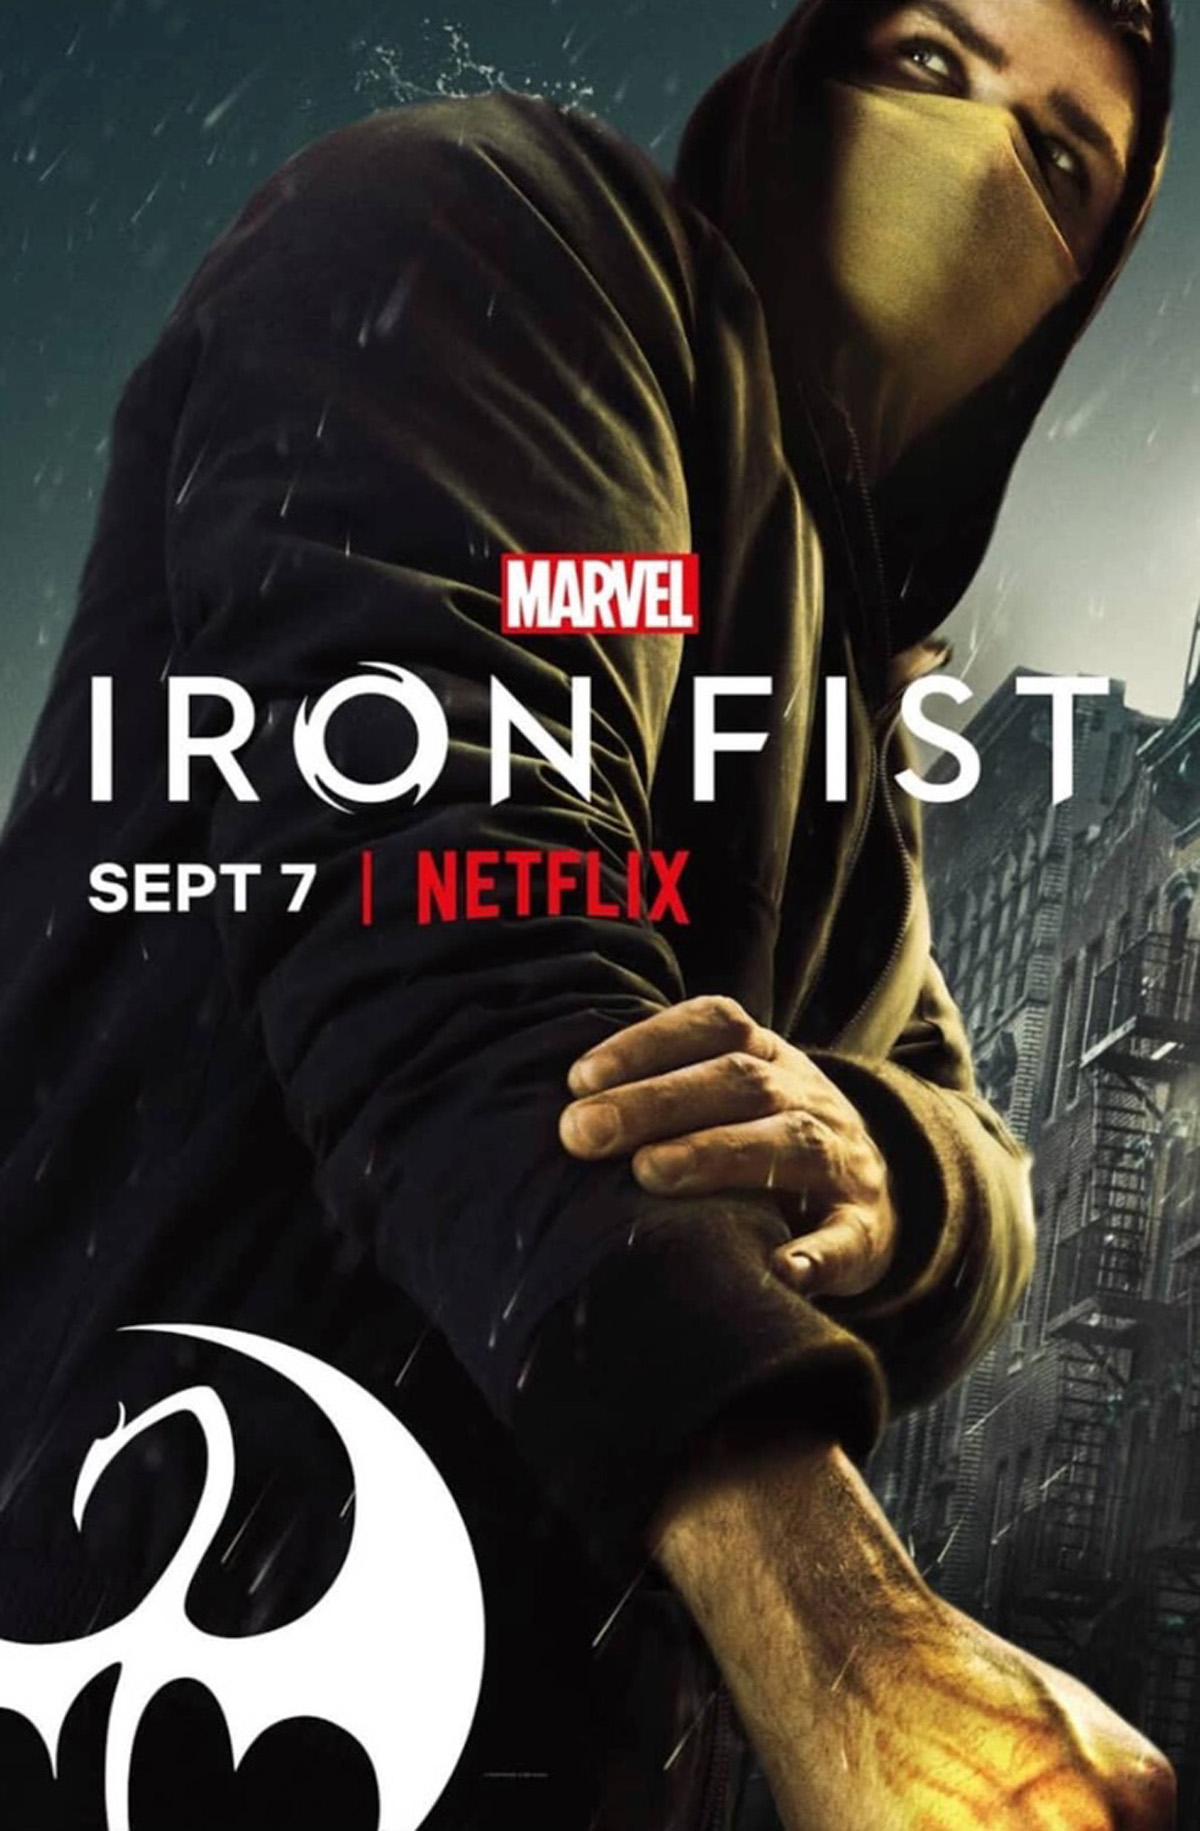 Marvel S Iron Fist Season 2 Photos Officially Released By Netflix